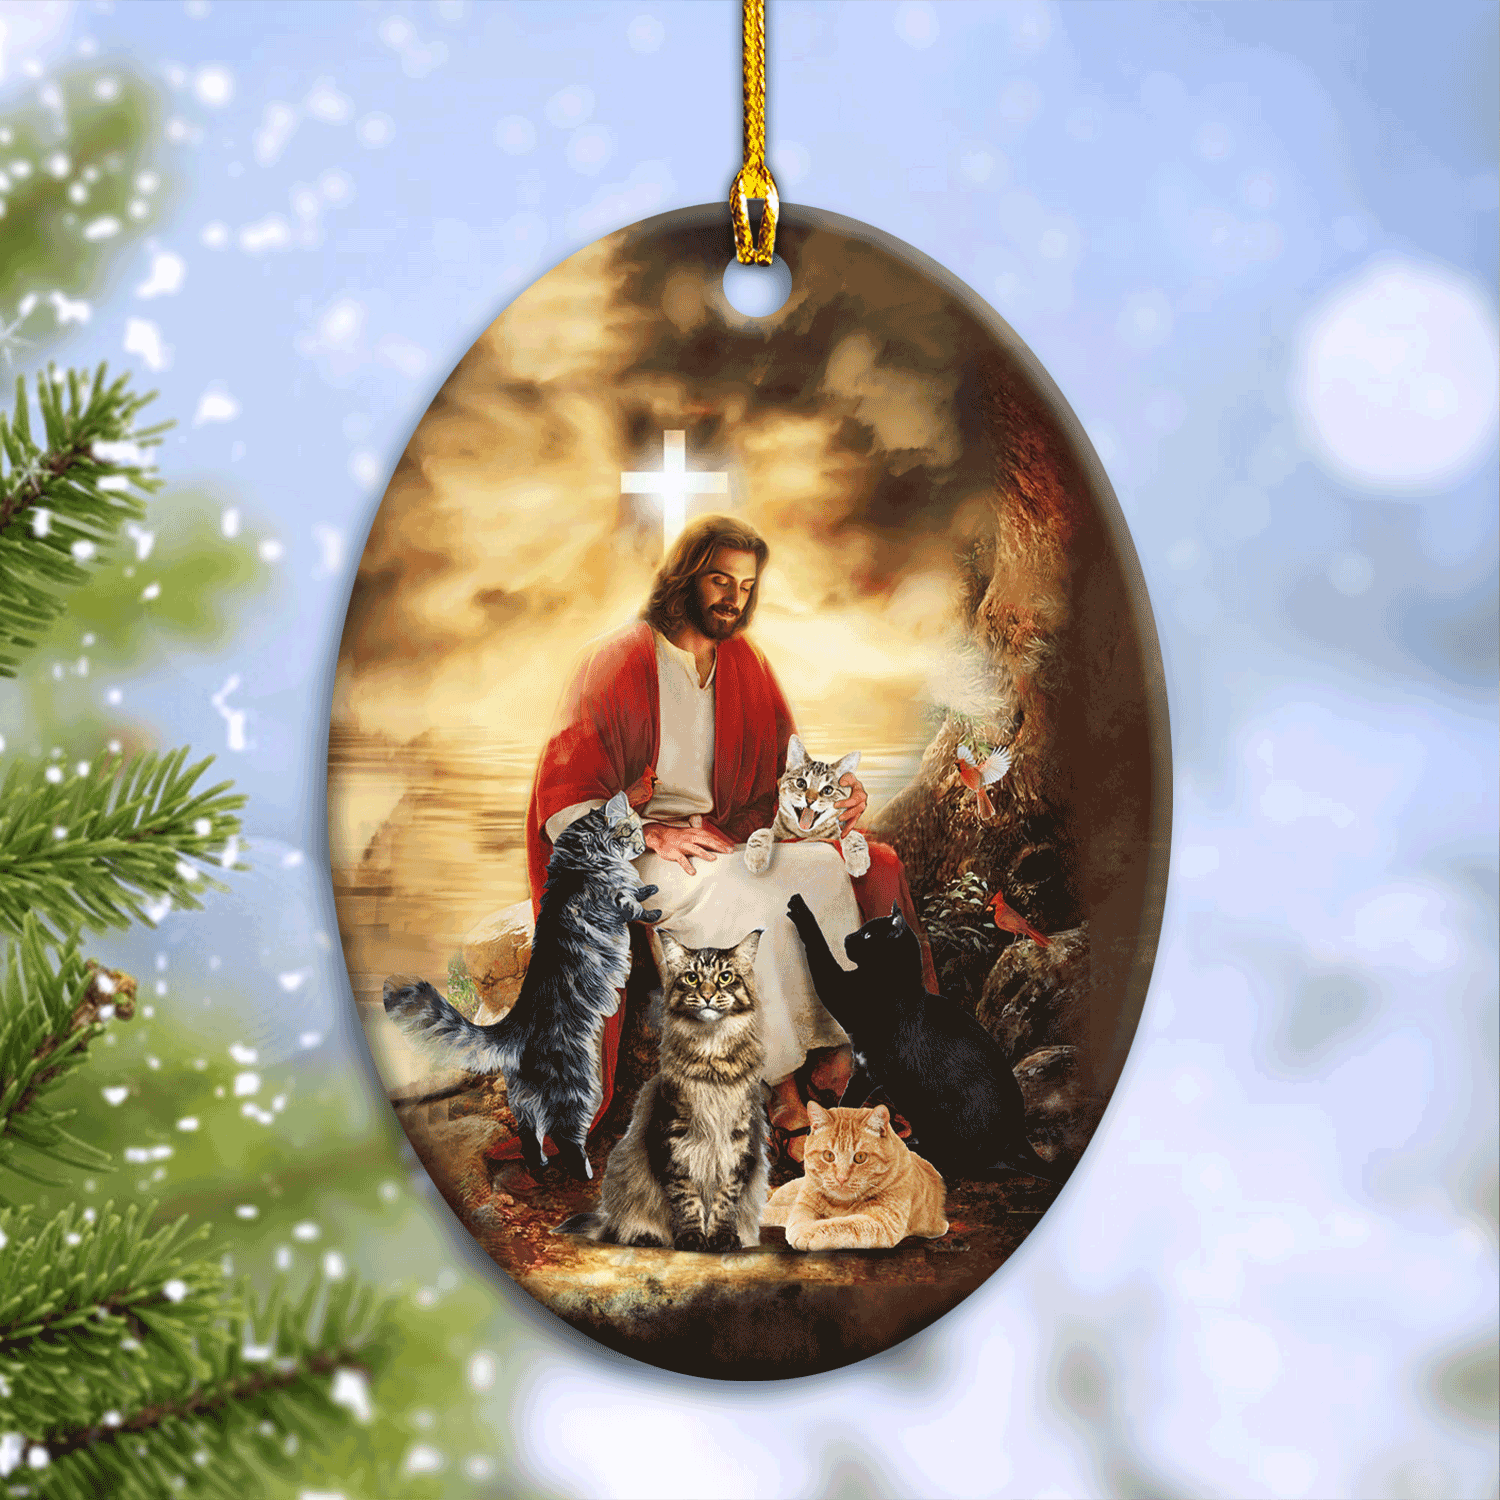 Jesus Oval Ceramic Ornament - Cats Painting, Sitting With Jesus - Christian Gift